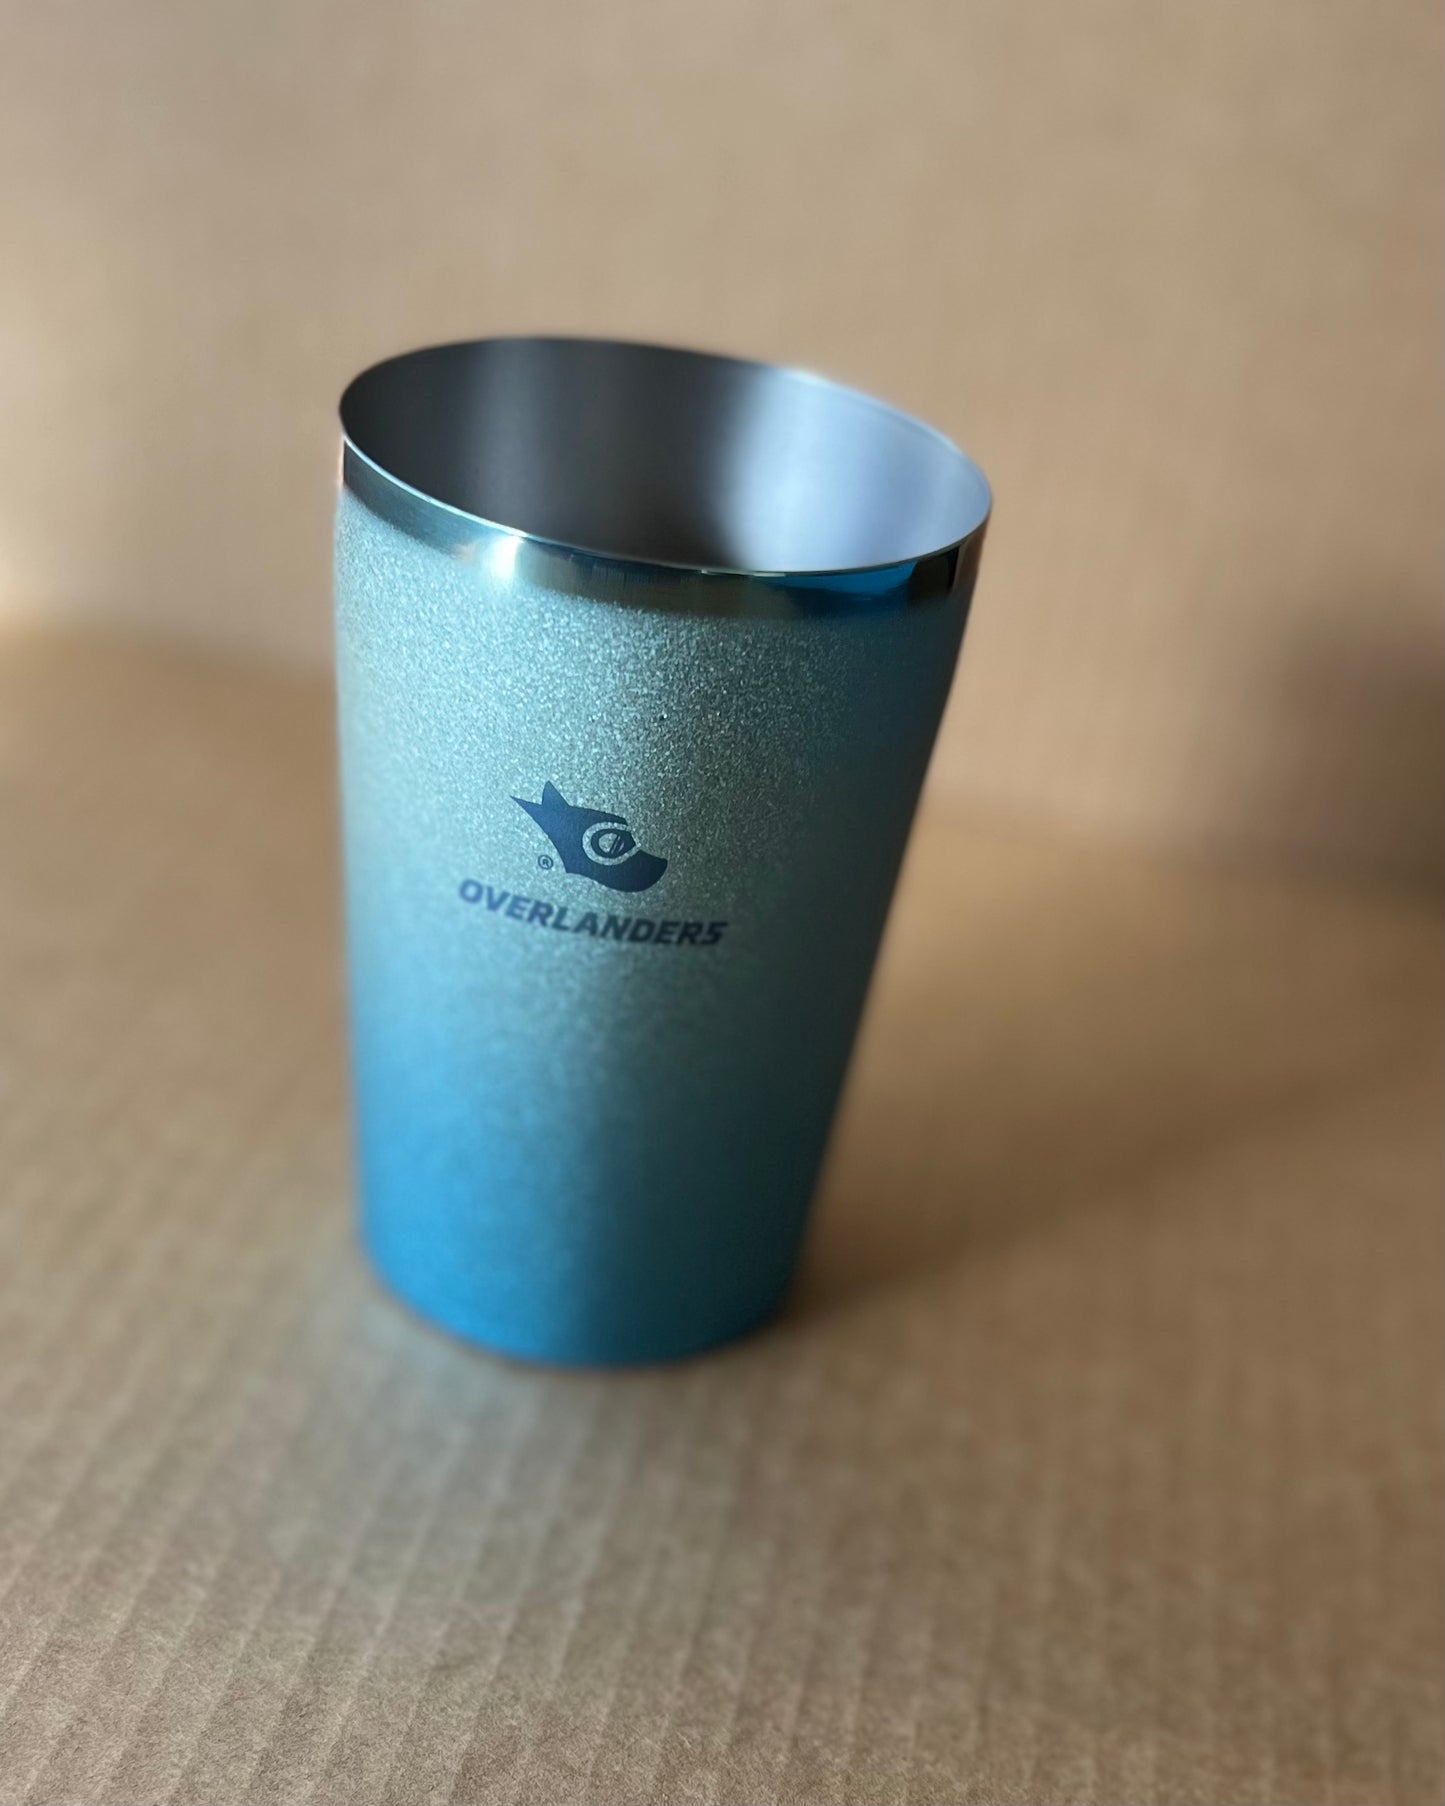 Overlanders Titanium Double-wall Cup, Blue fleck, made in Japan